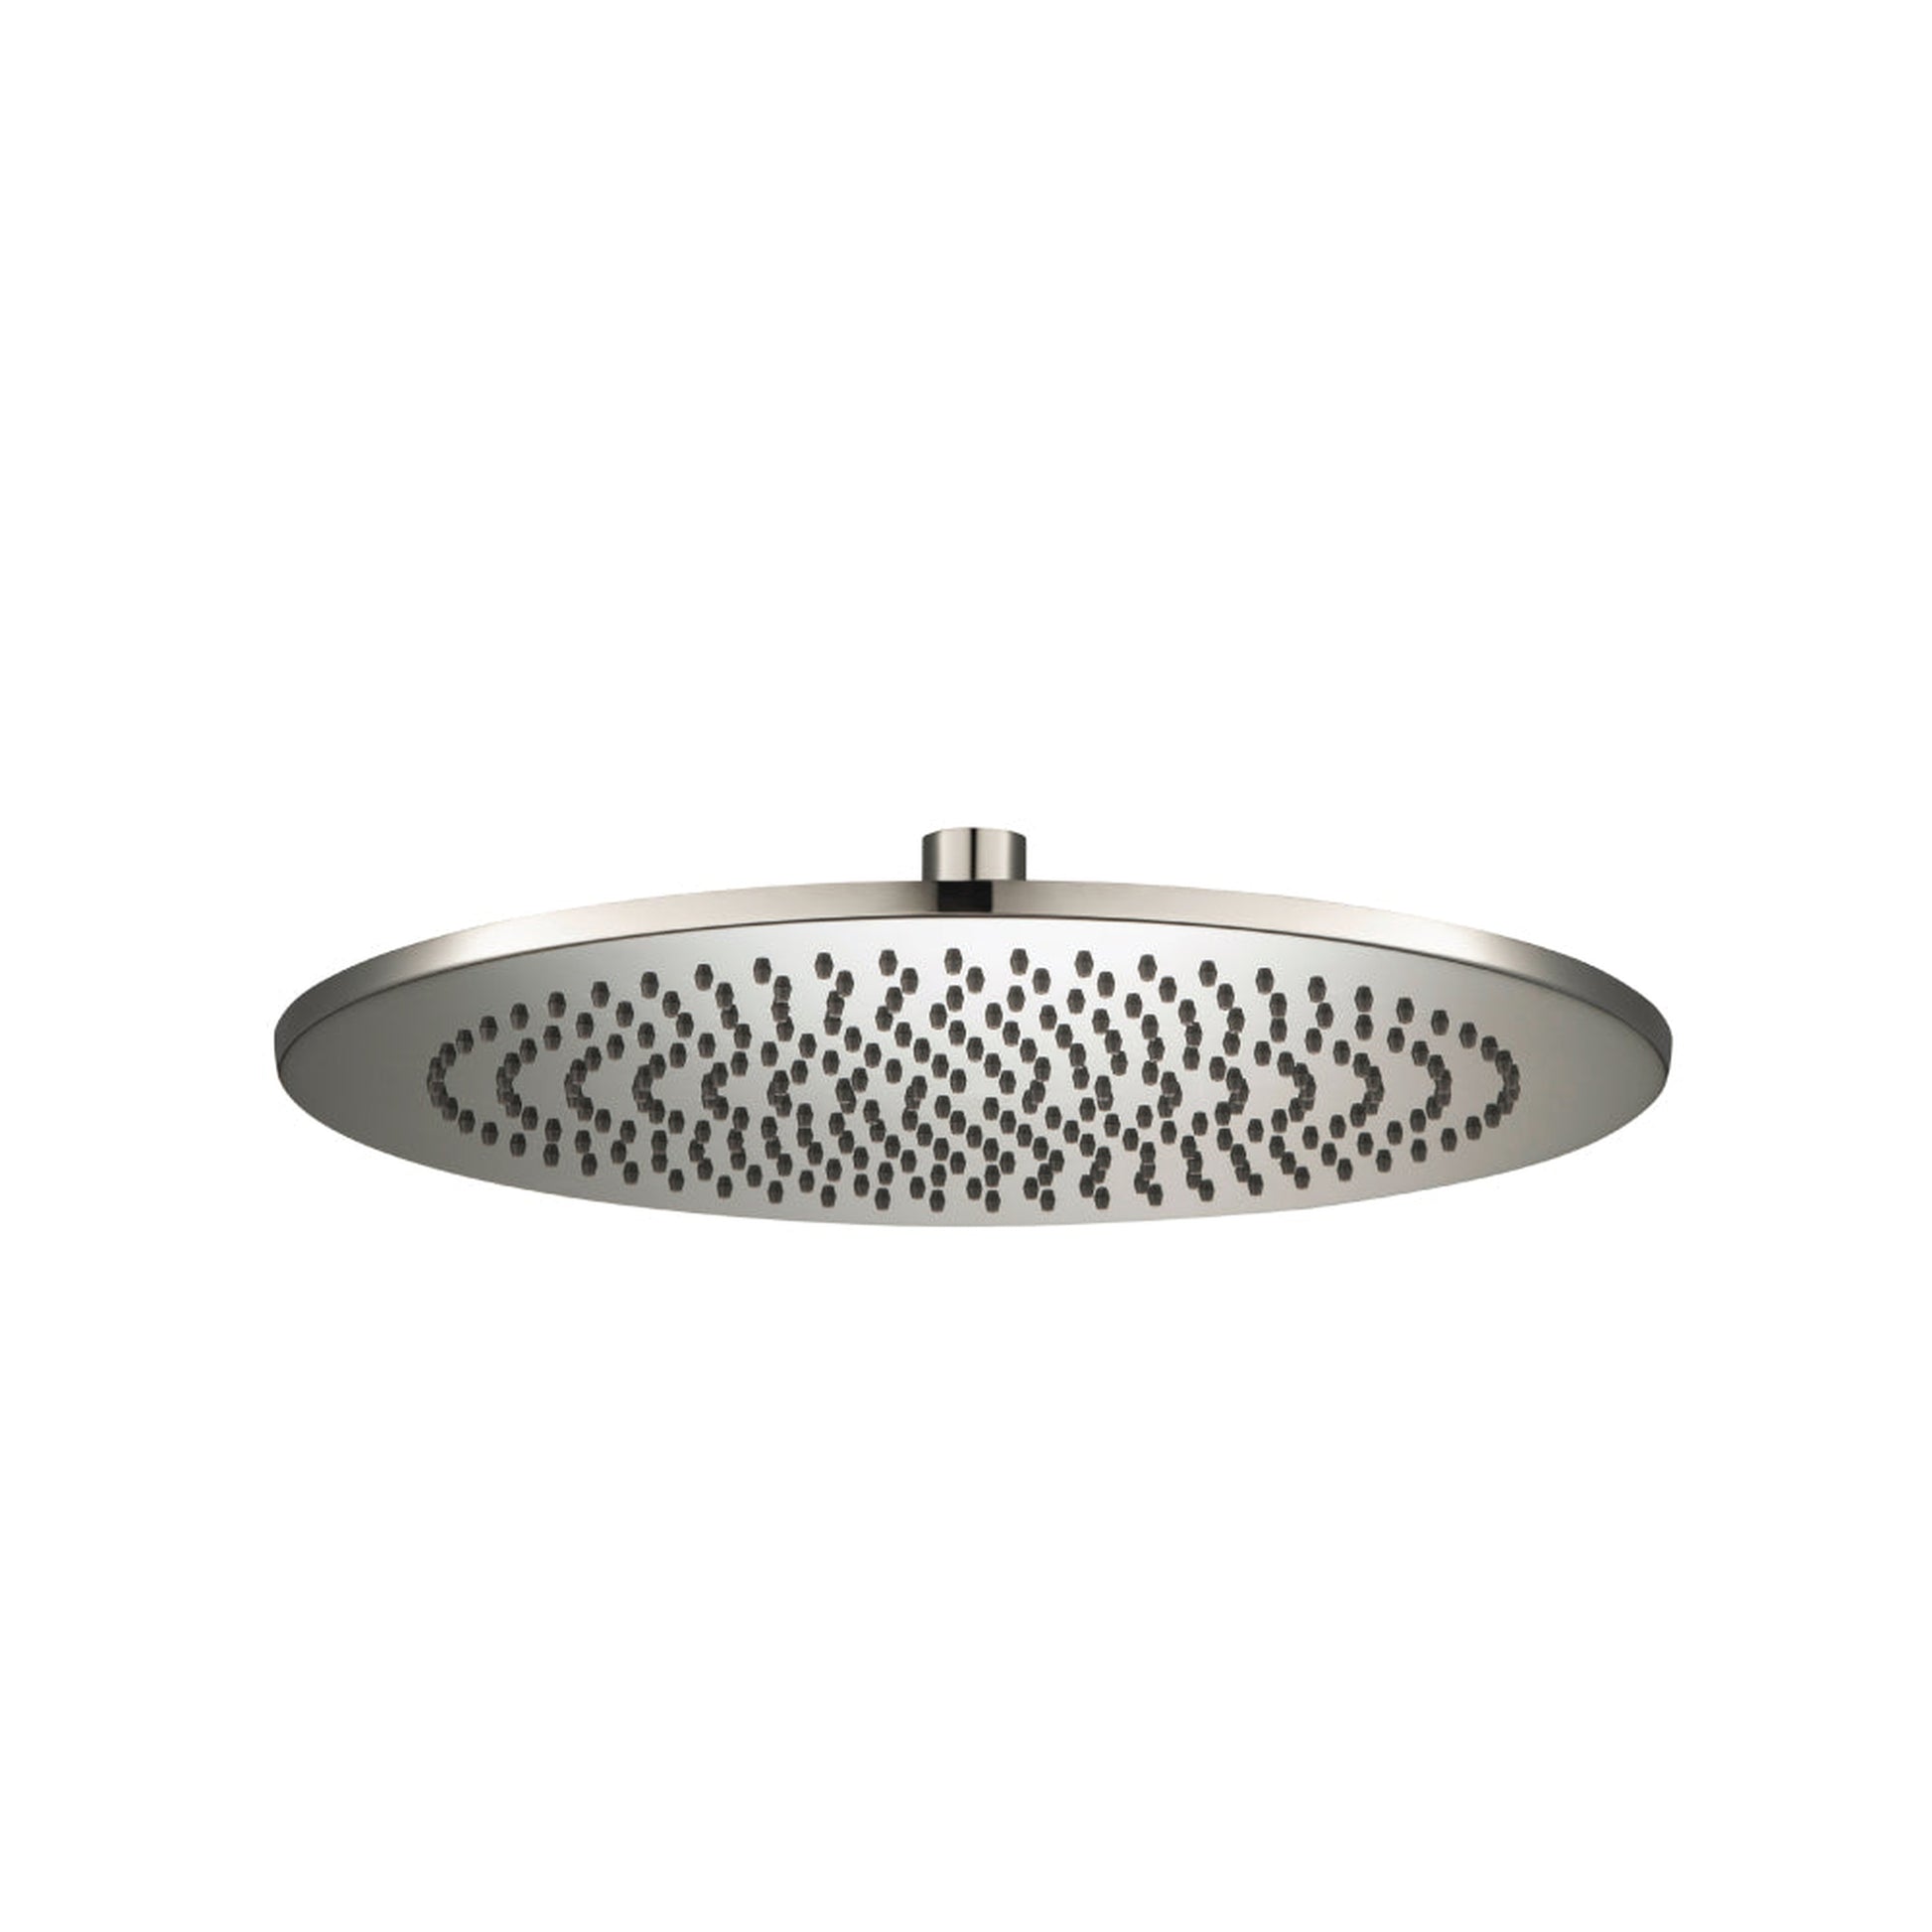 Isenberg Universal Fixtures 12" Single Function Round Polished Nickel PVD Solid Brass Rain Shower Head With 15" Wall Mounted Shower Arm